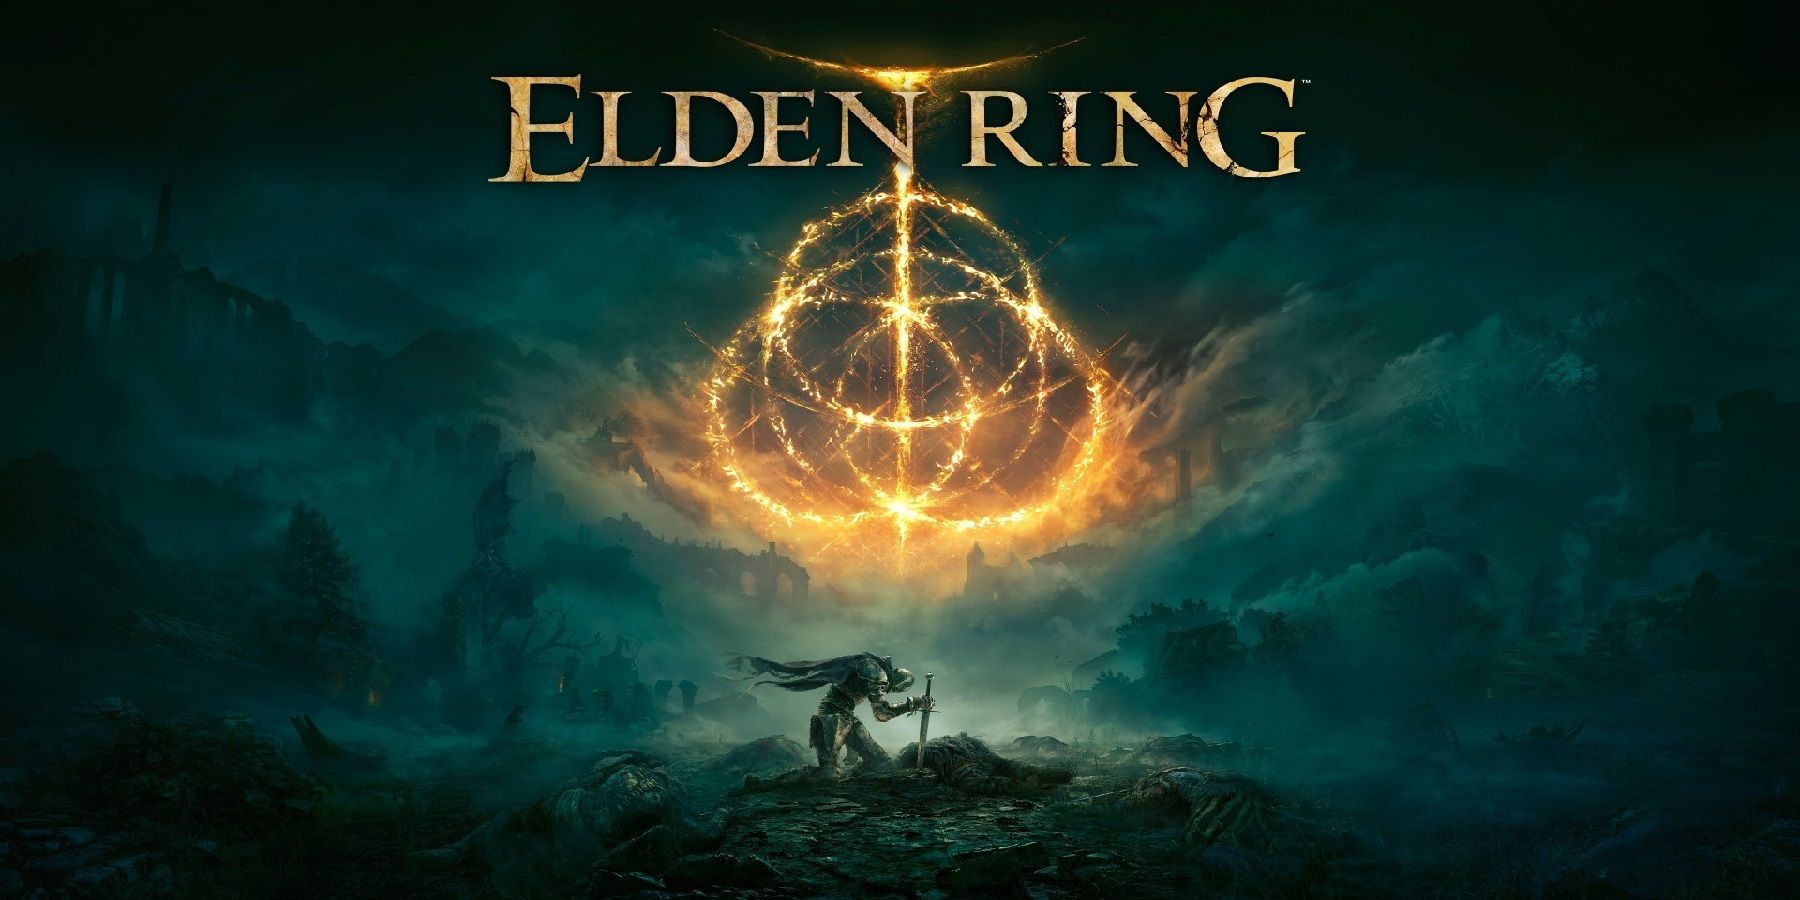 Elden Ring Cut Content Revealed, Includes New Quest Line